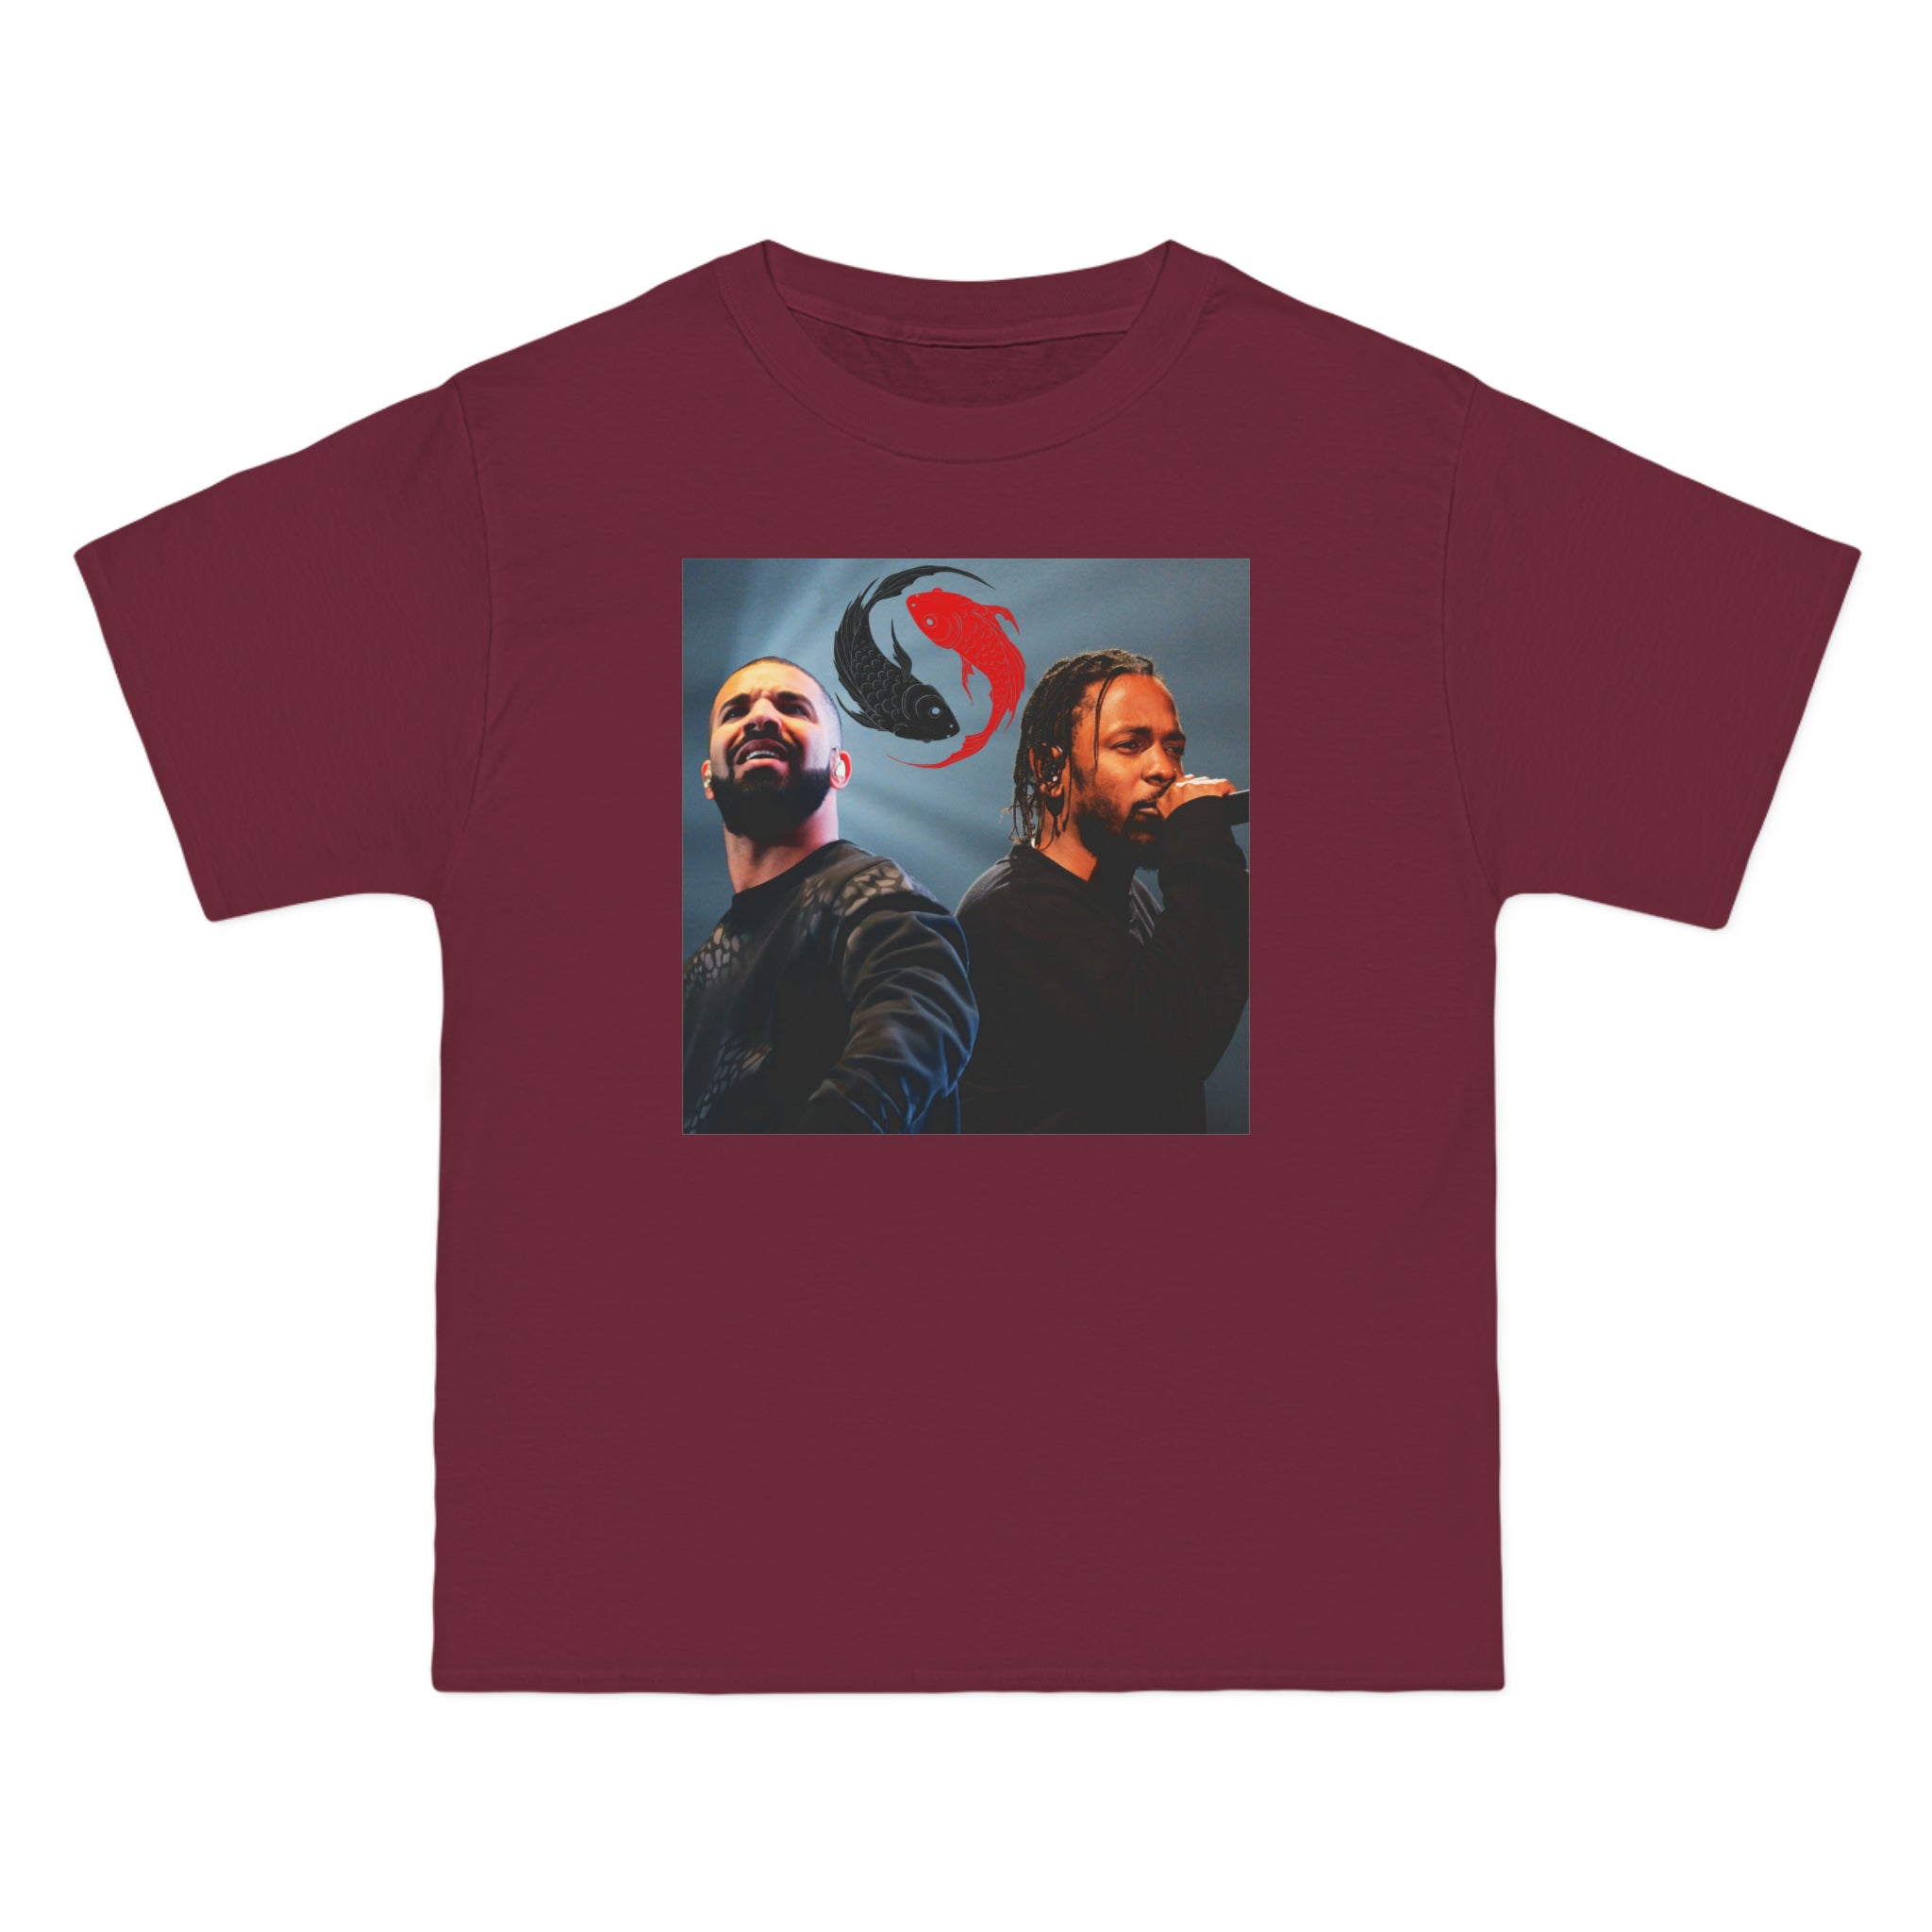 The image showcases a stylish, black Beefy-T® short-sleeve t-shirt adorned with a unique Yin and Yang design, artistically merging the iconic profiles of Drizzy and Lamar. The symbol not only represents balance and duality but also celebrates the rap beef rivalry turned mutual admiration, making it a profound statement piece for any fan of the genre.